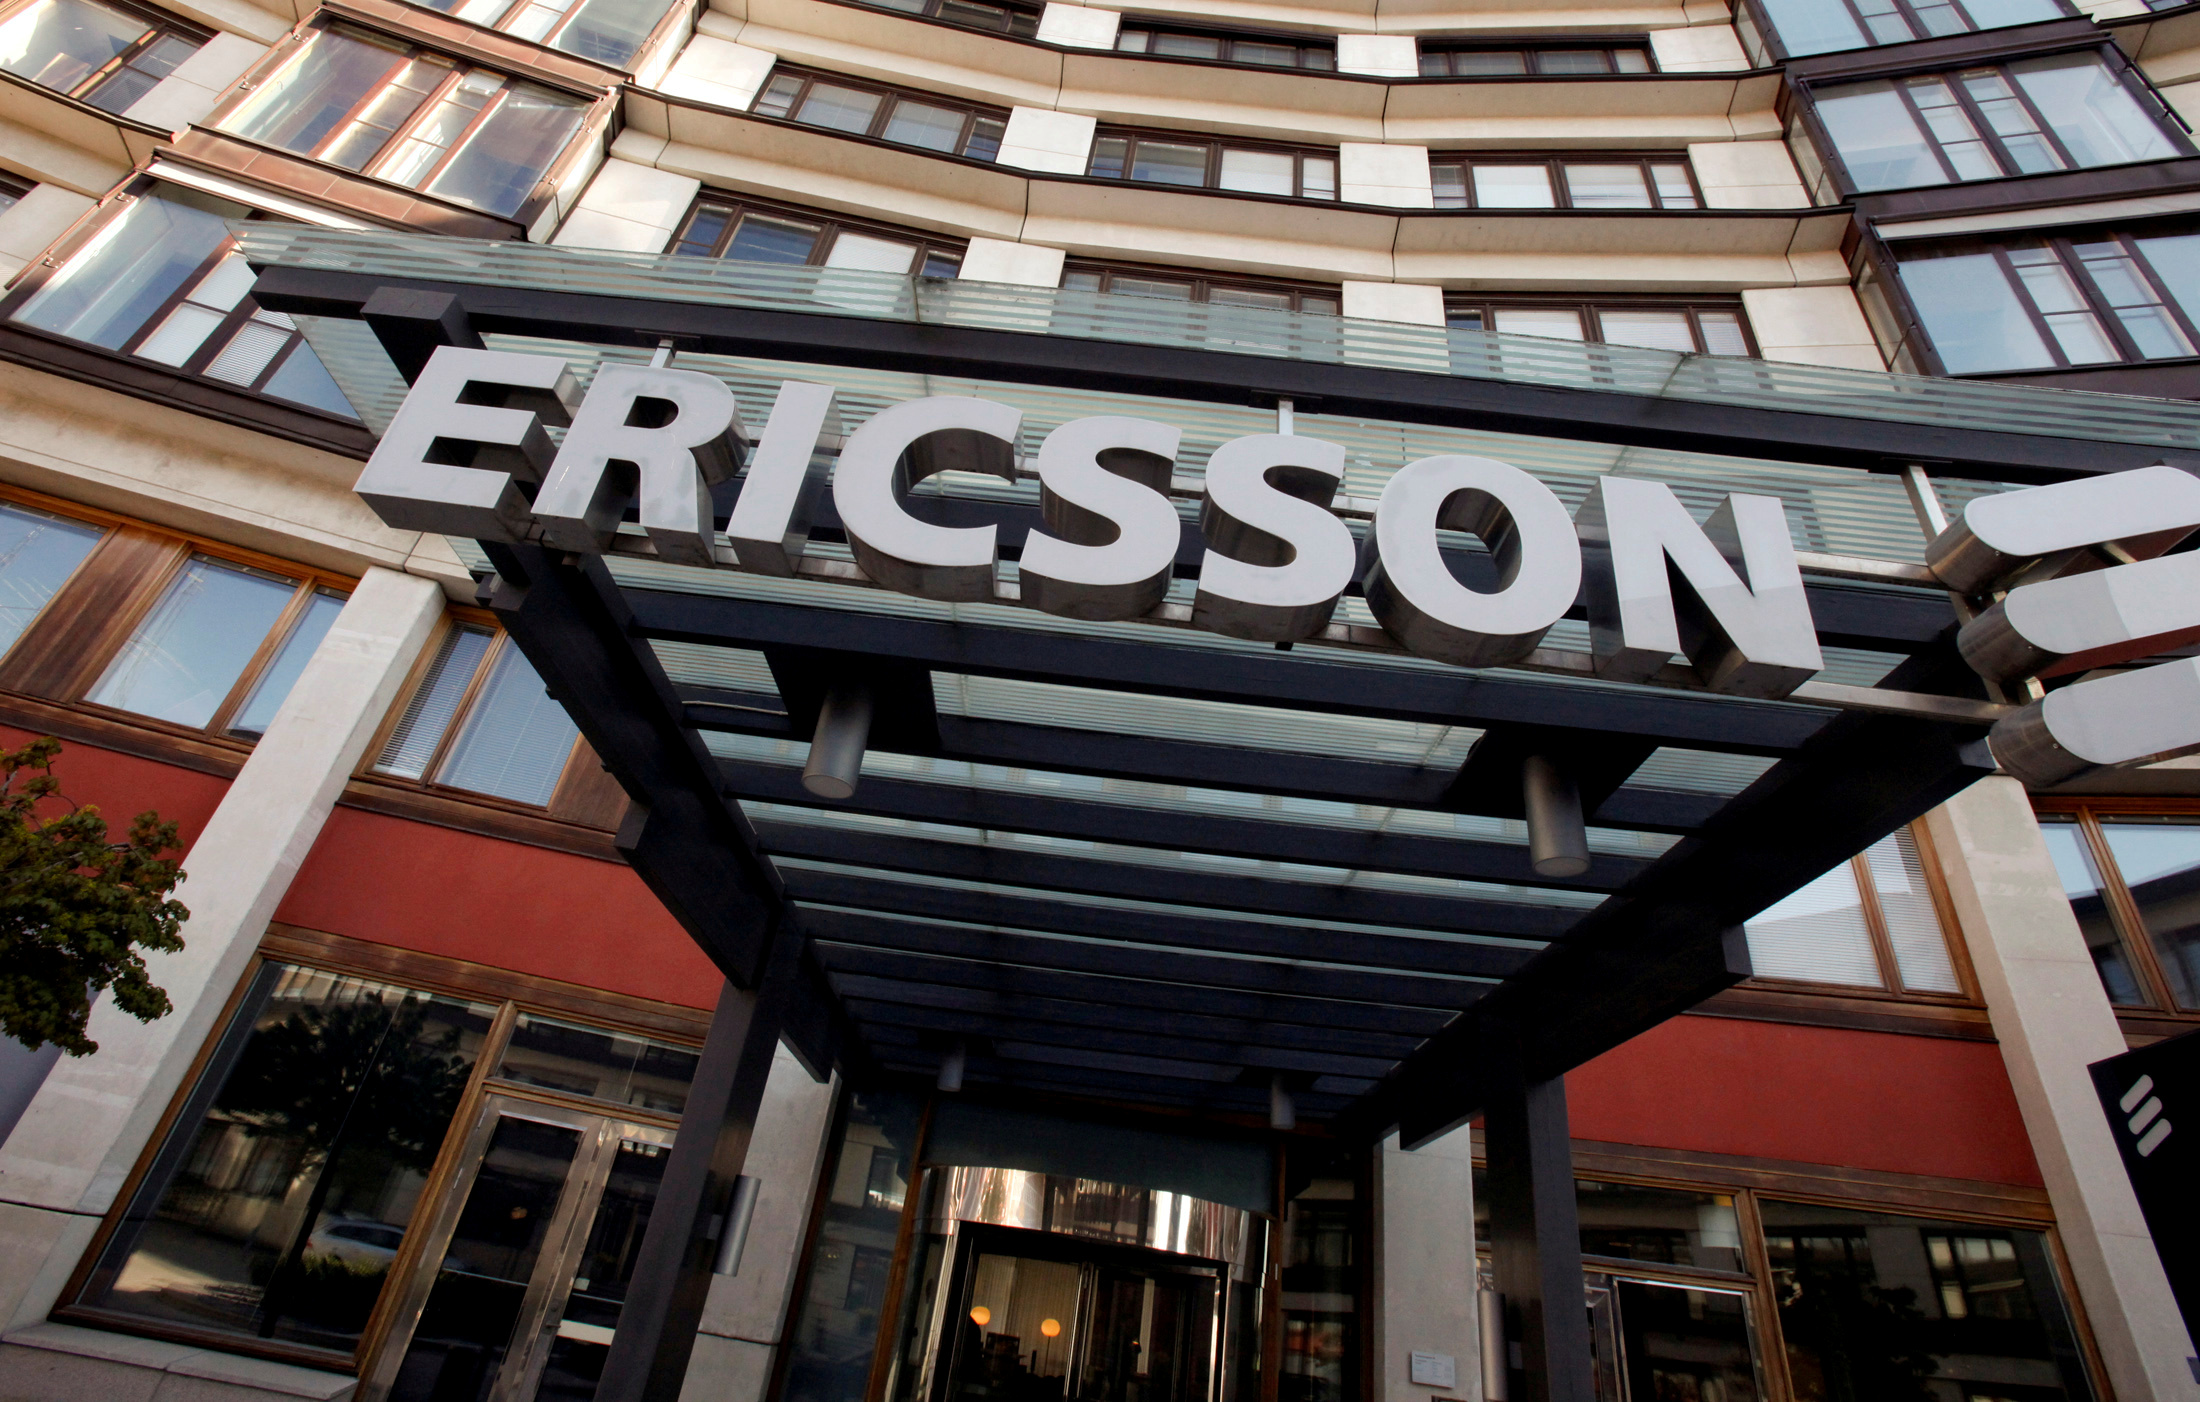 The exterior of Ericsson's headquarters is seen in Stockholm